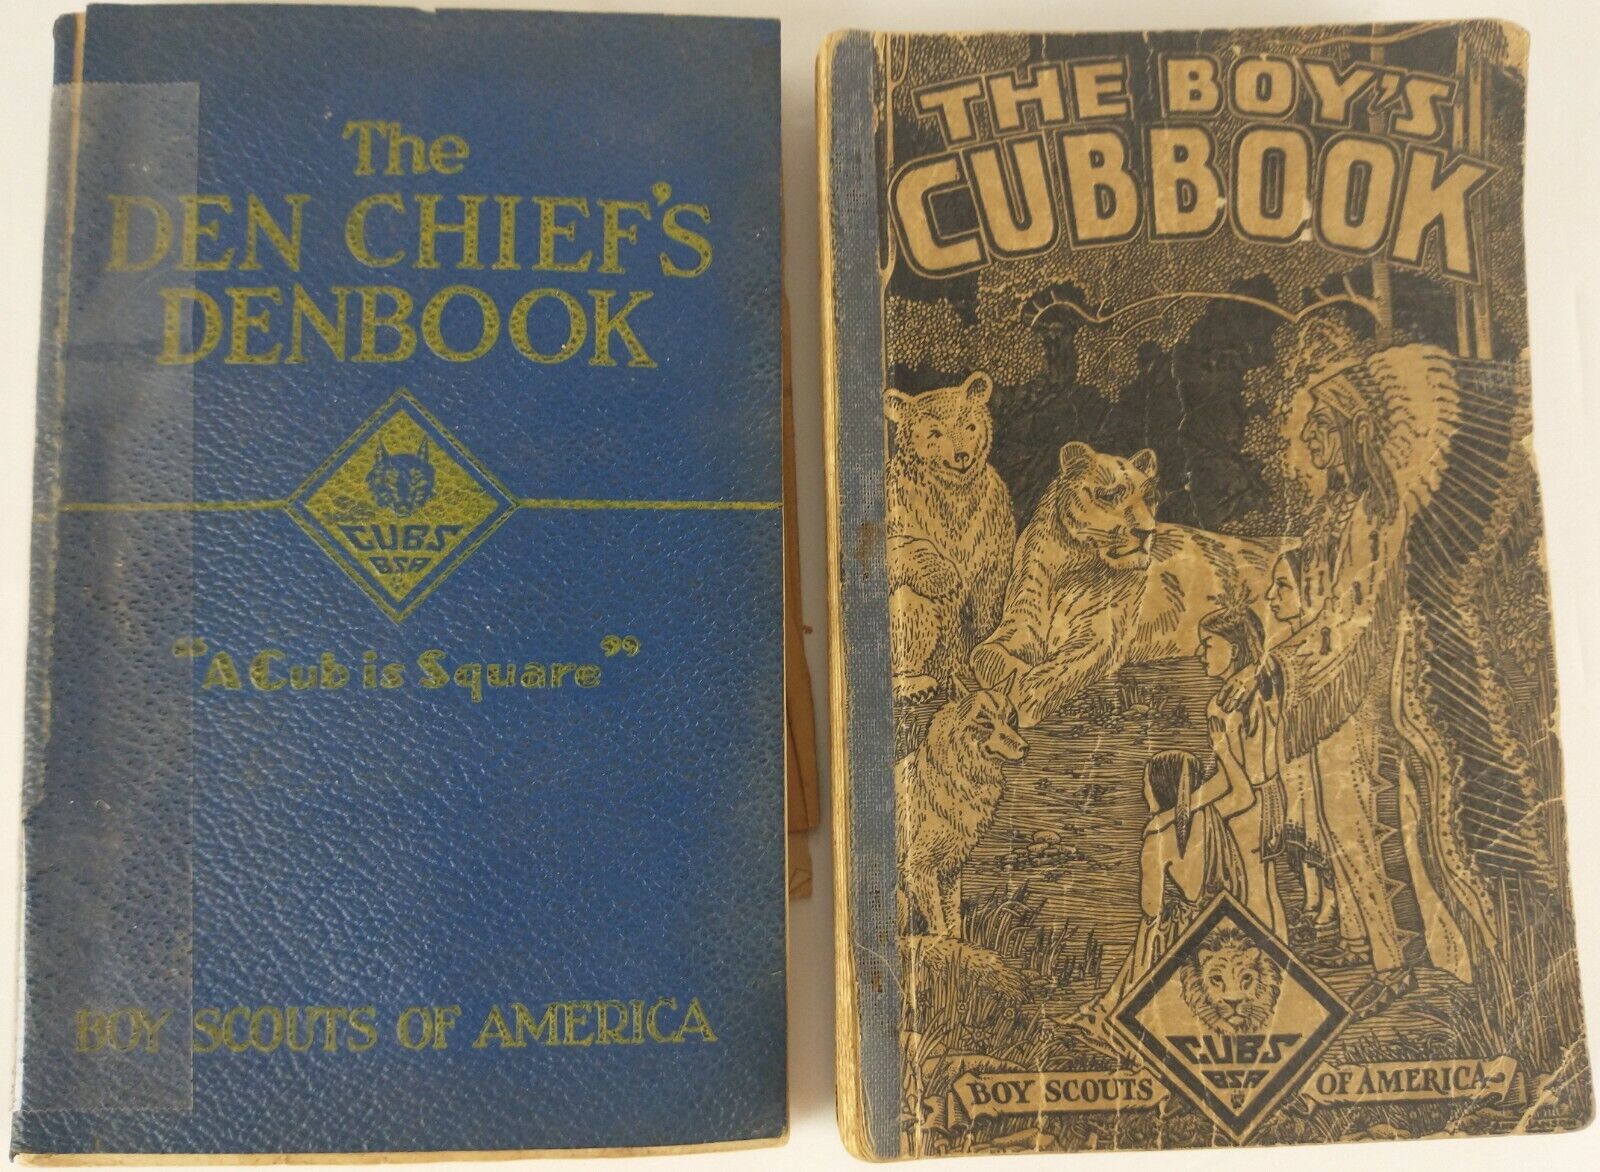 Vintage 1930 34 Boy Scouts of America Cubbook and Den Chief's Denbook T6